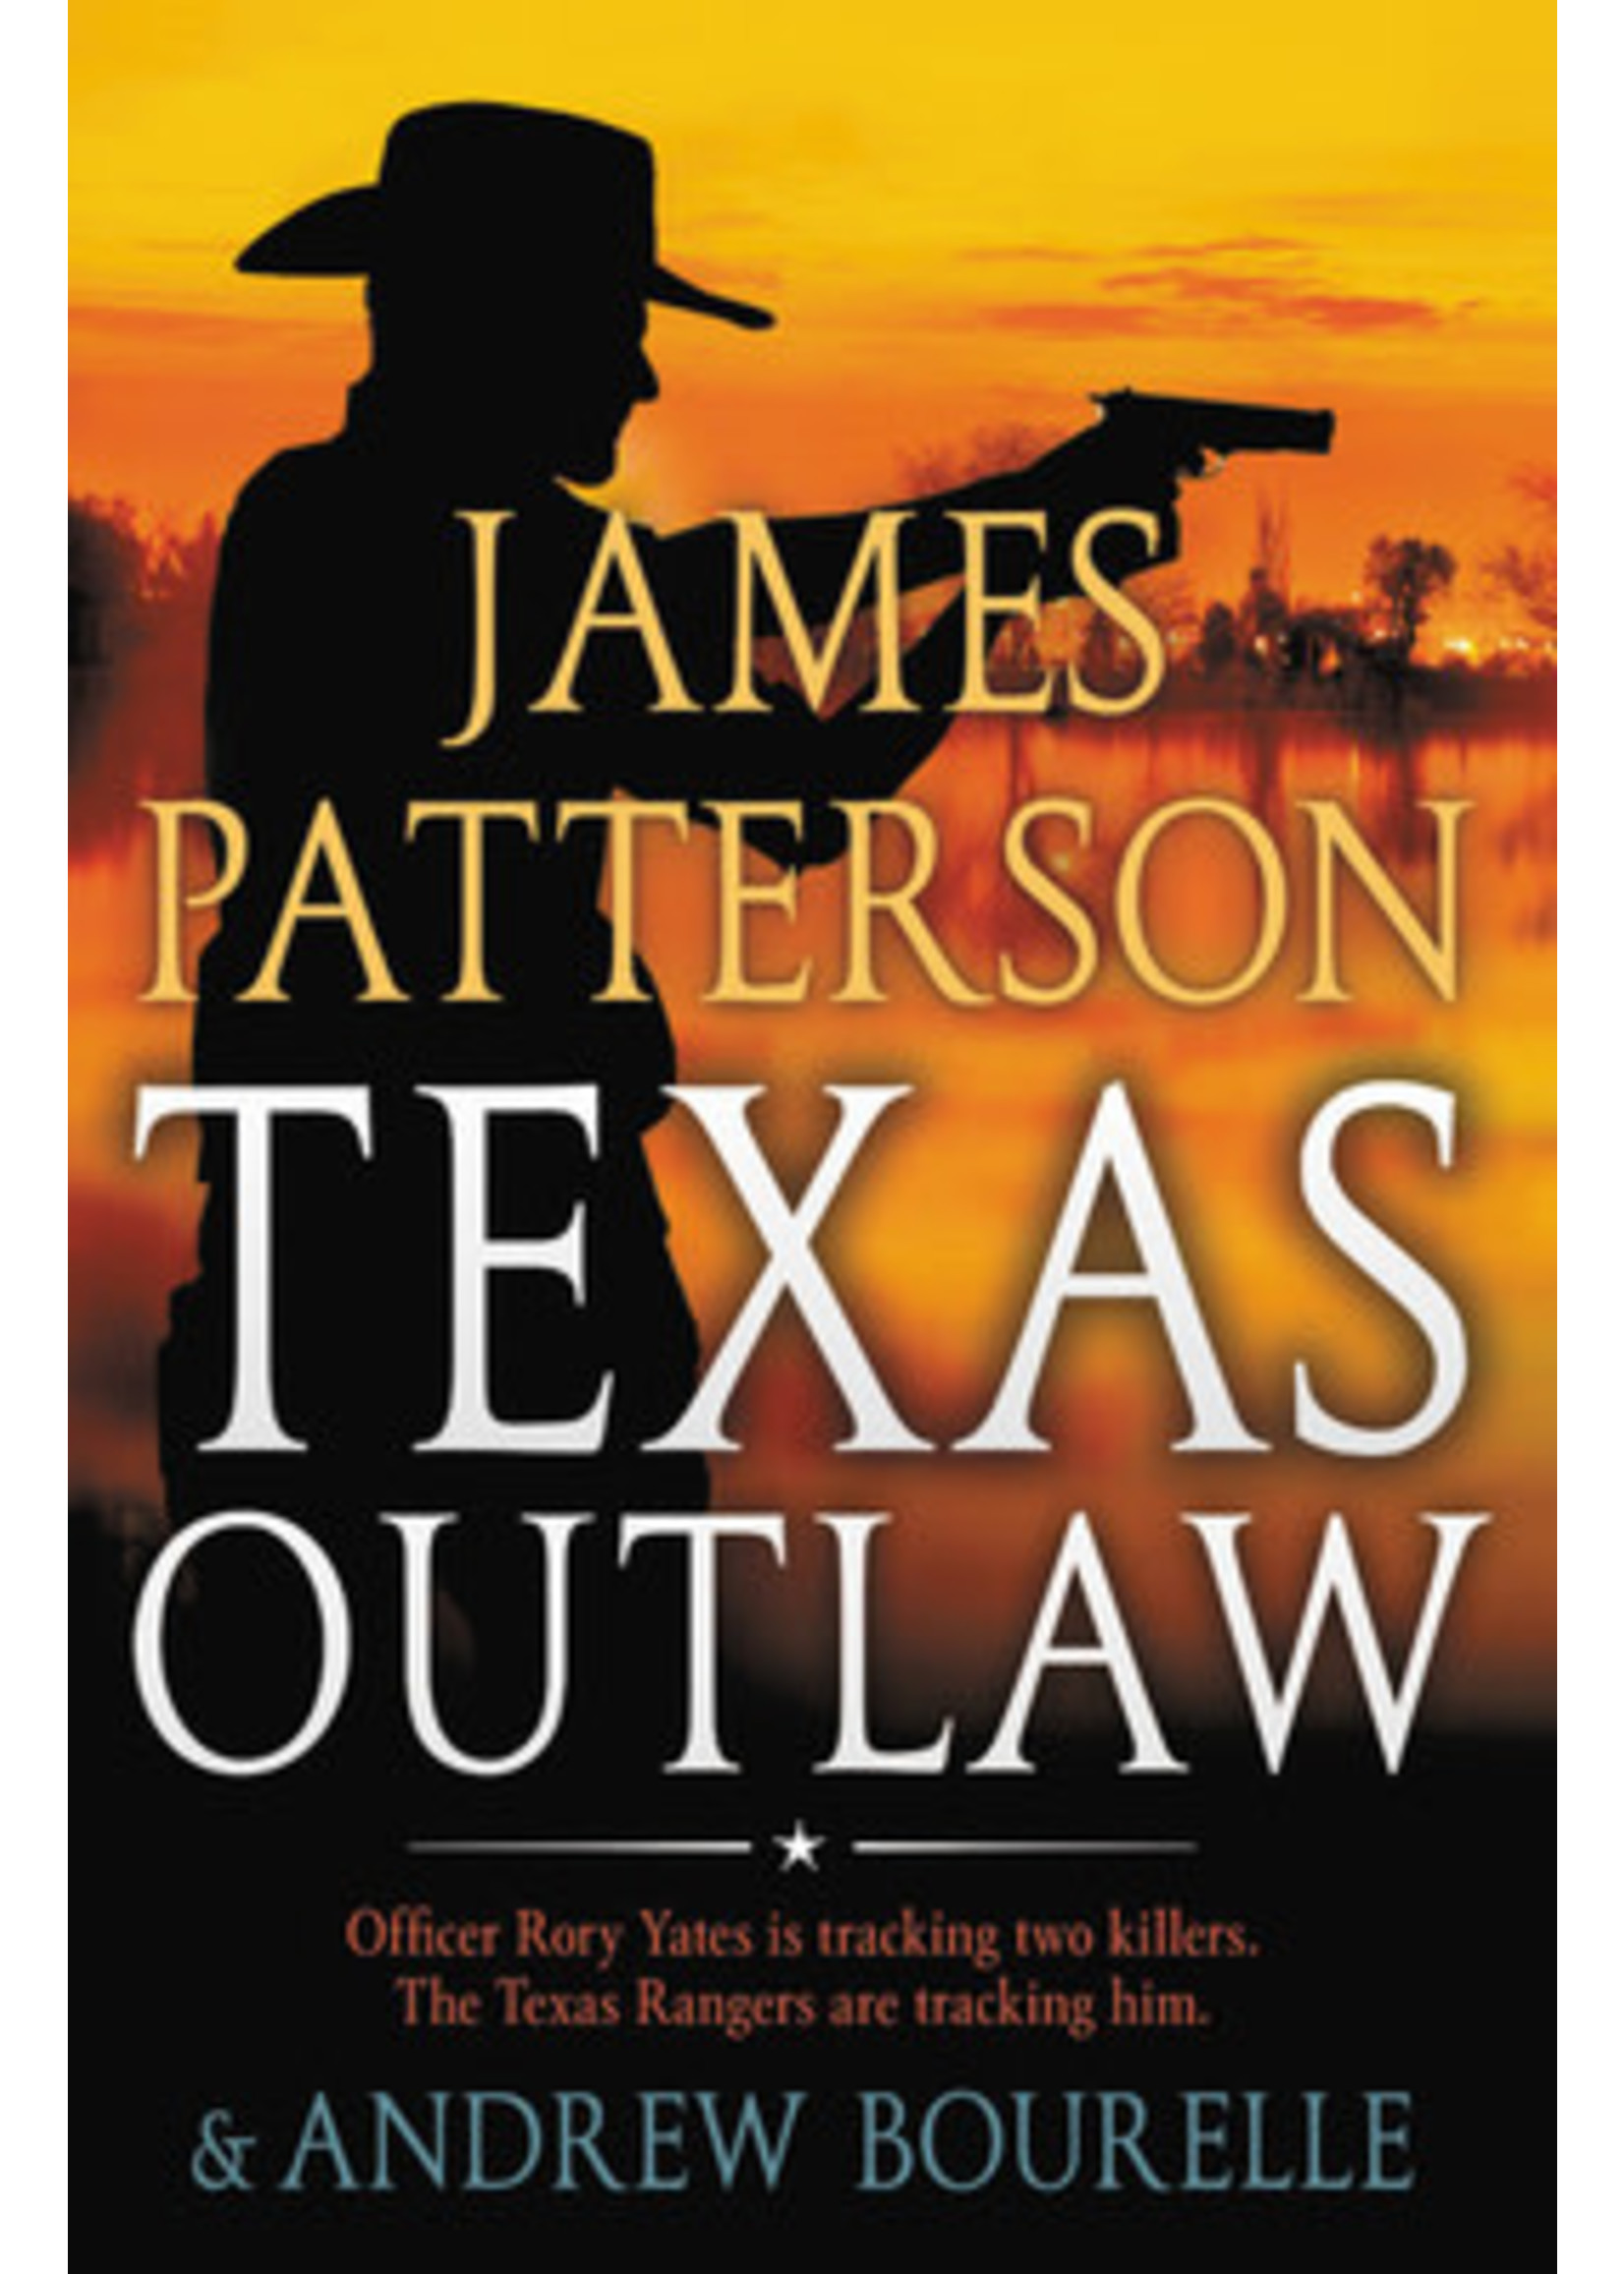 Texas Outlaw (Rory Yates #2) by James Patterson